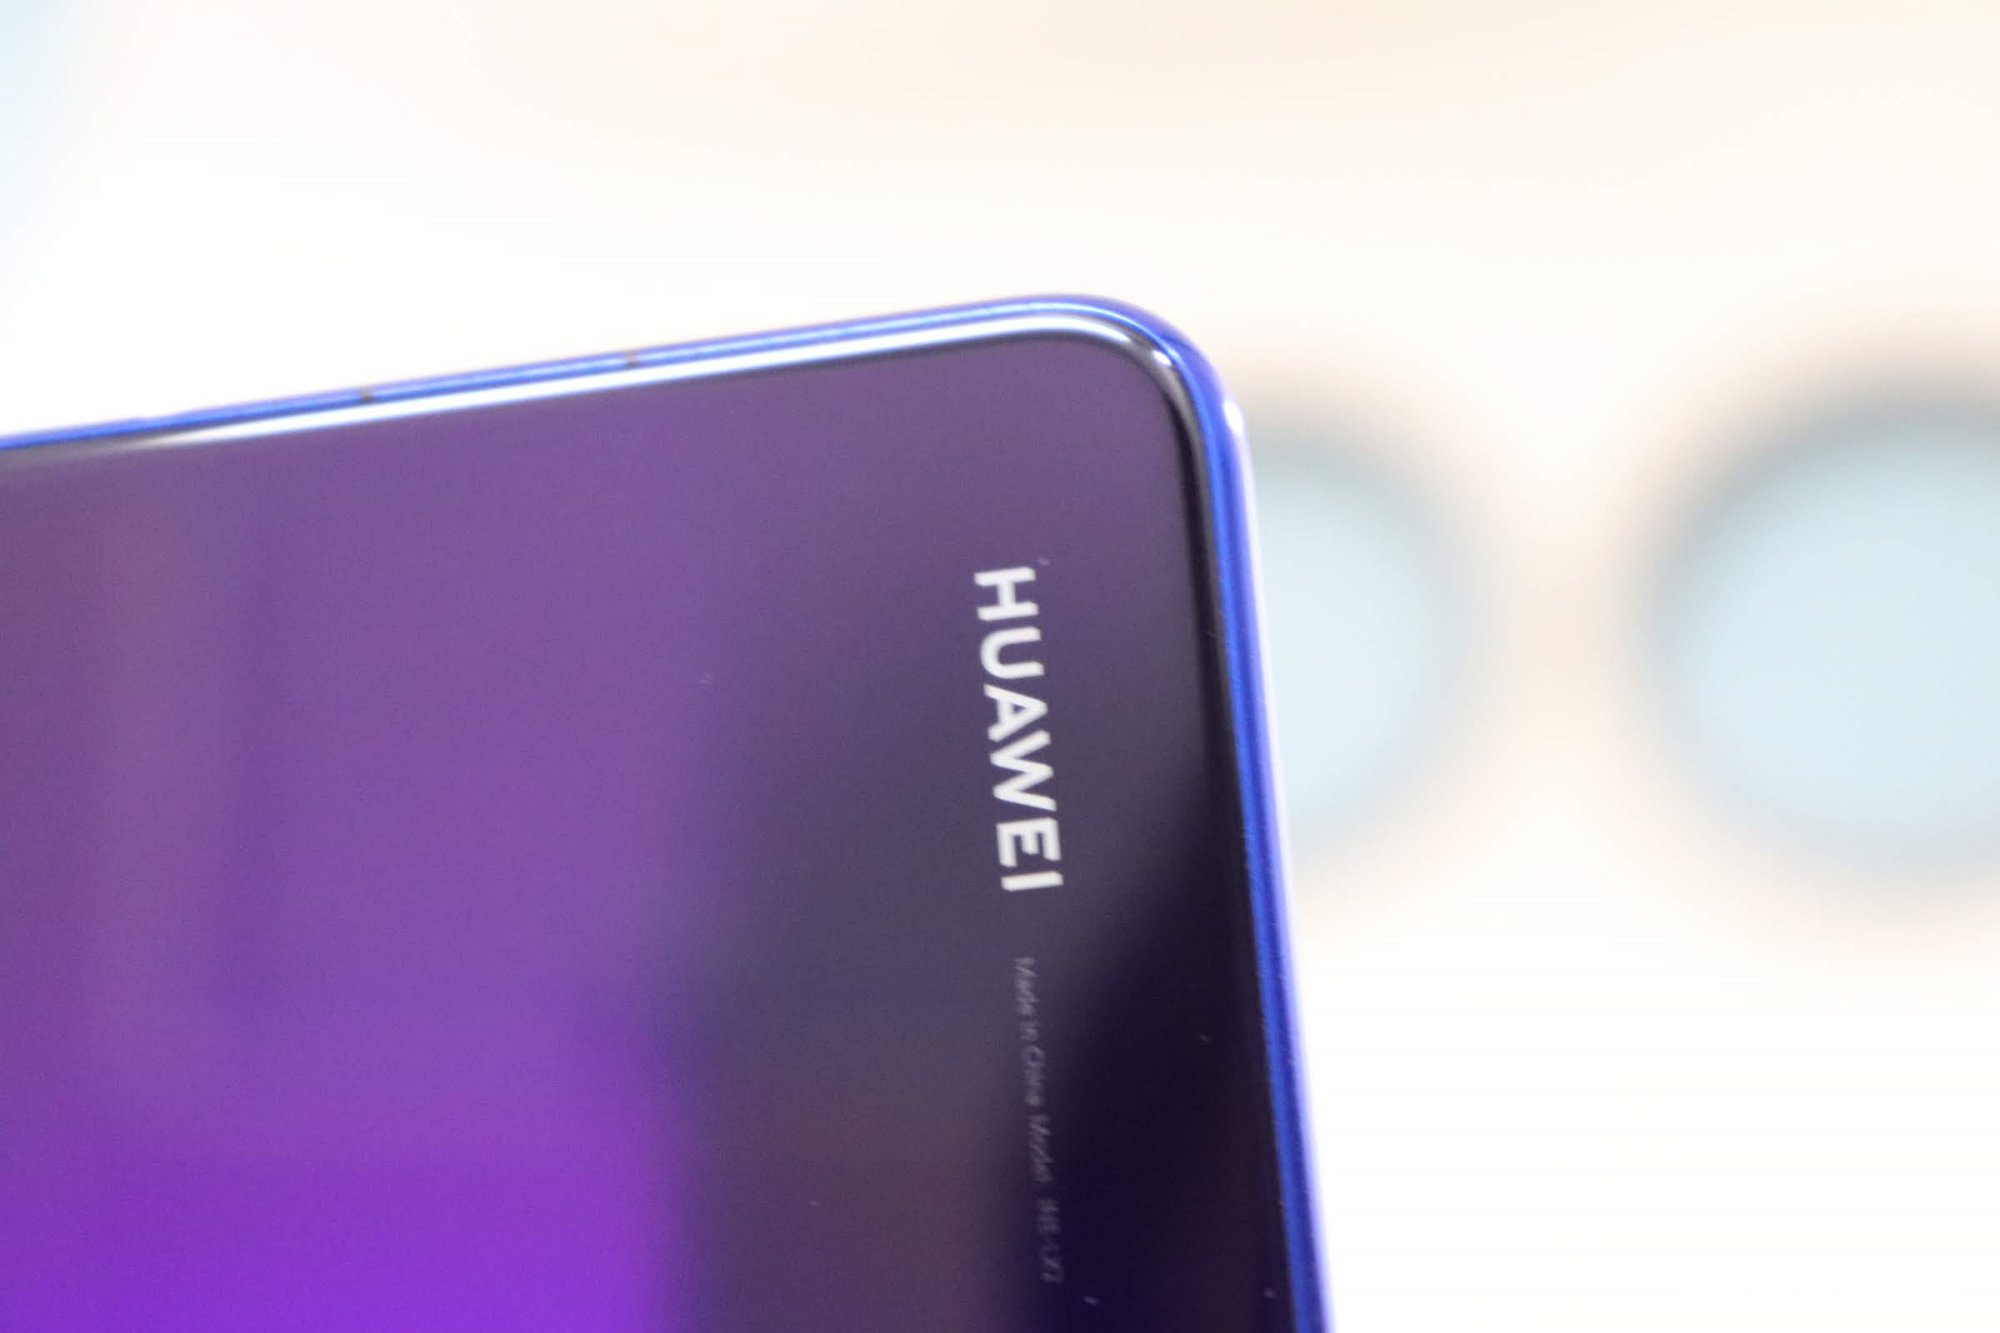 Huawei clarifies the issue on how existing smartphones will fare after permanent Android ban﻿